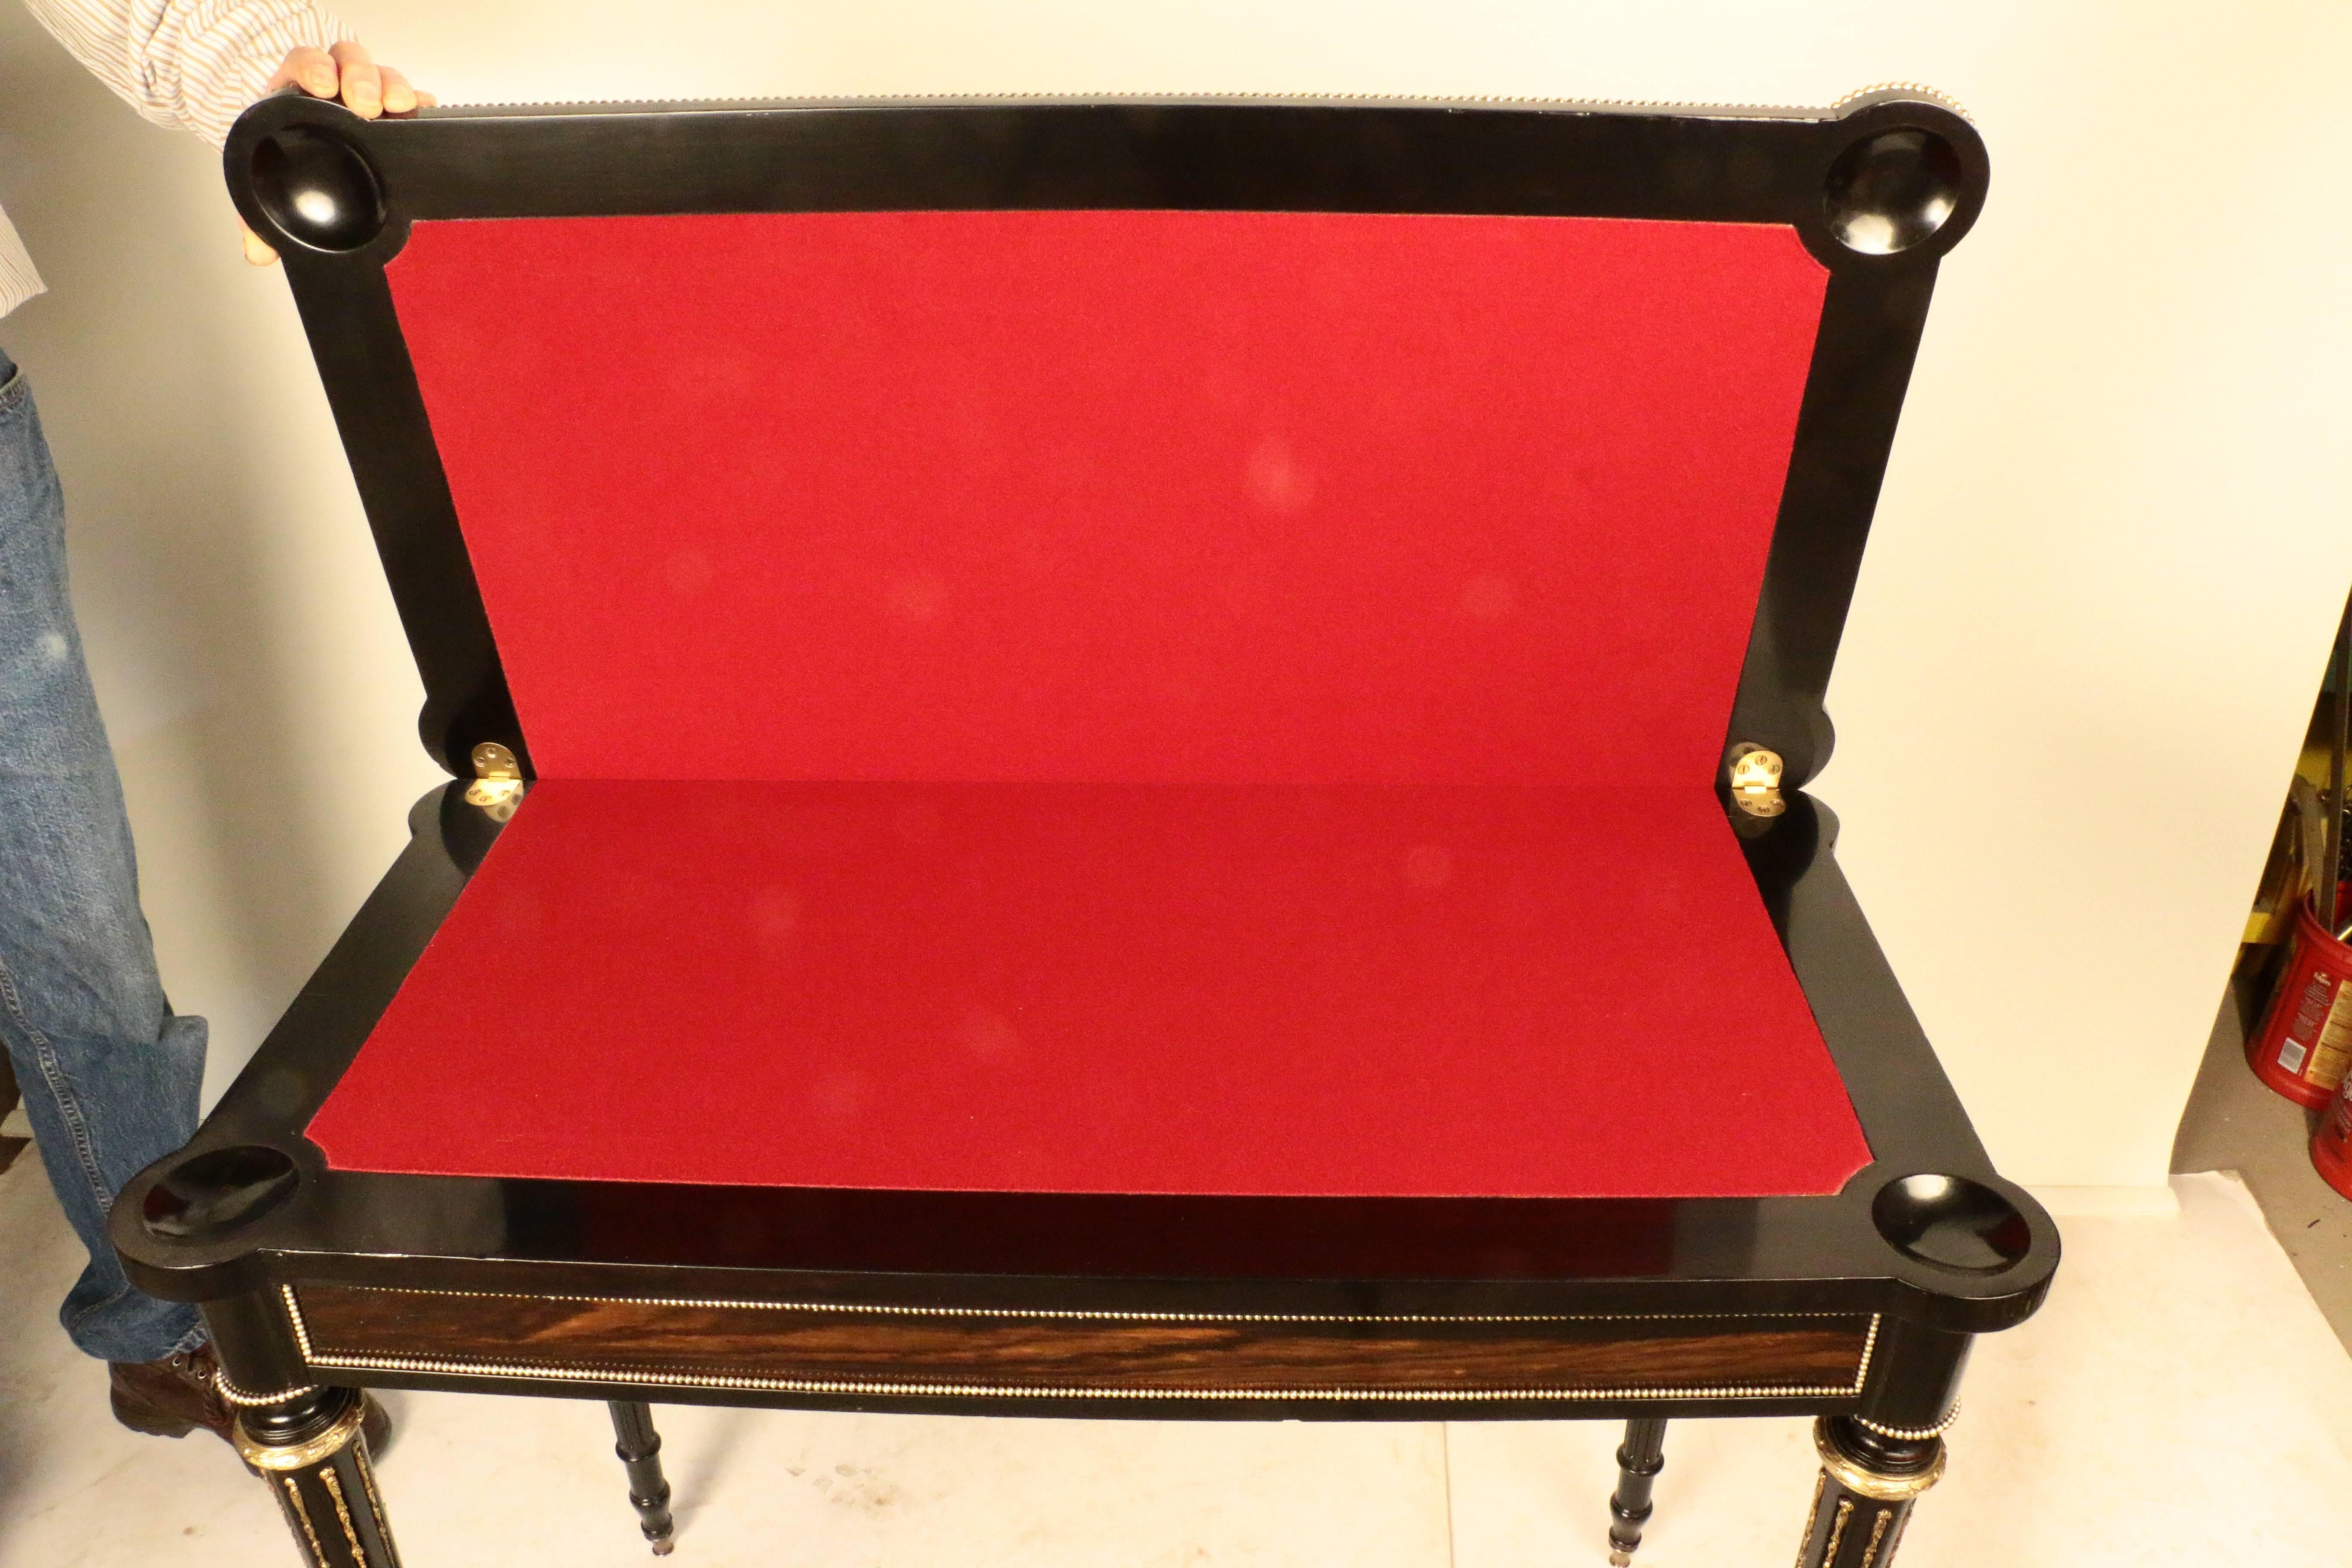 The boldly figured coromandel surface with eared corners, opening to reveal a red baize surface, framed in ebonized mahogany, with a counter -well at each corner. The surface and paneled sides are edged with brass beading, There is a storage area